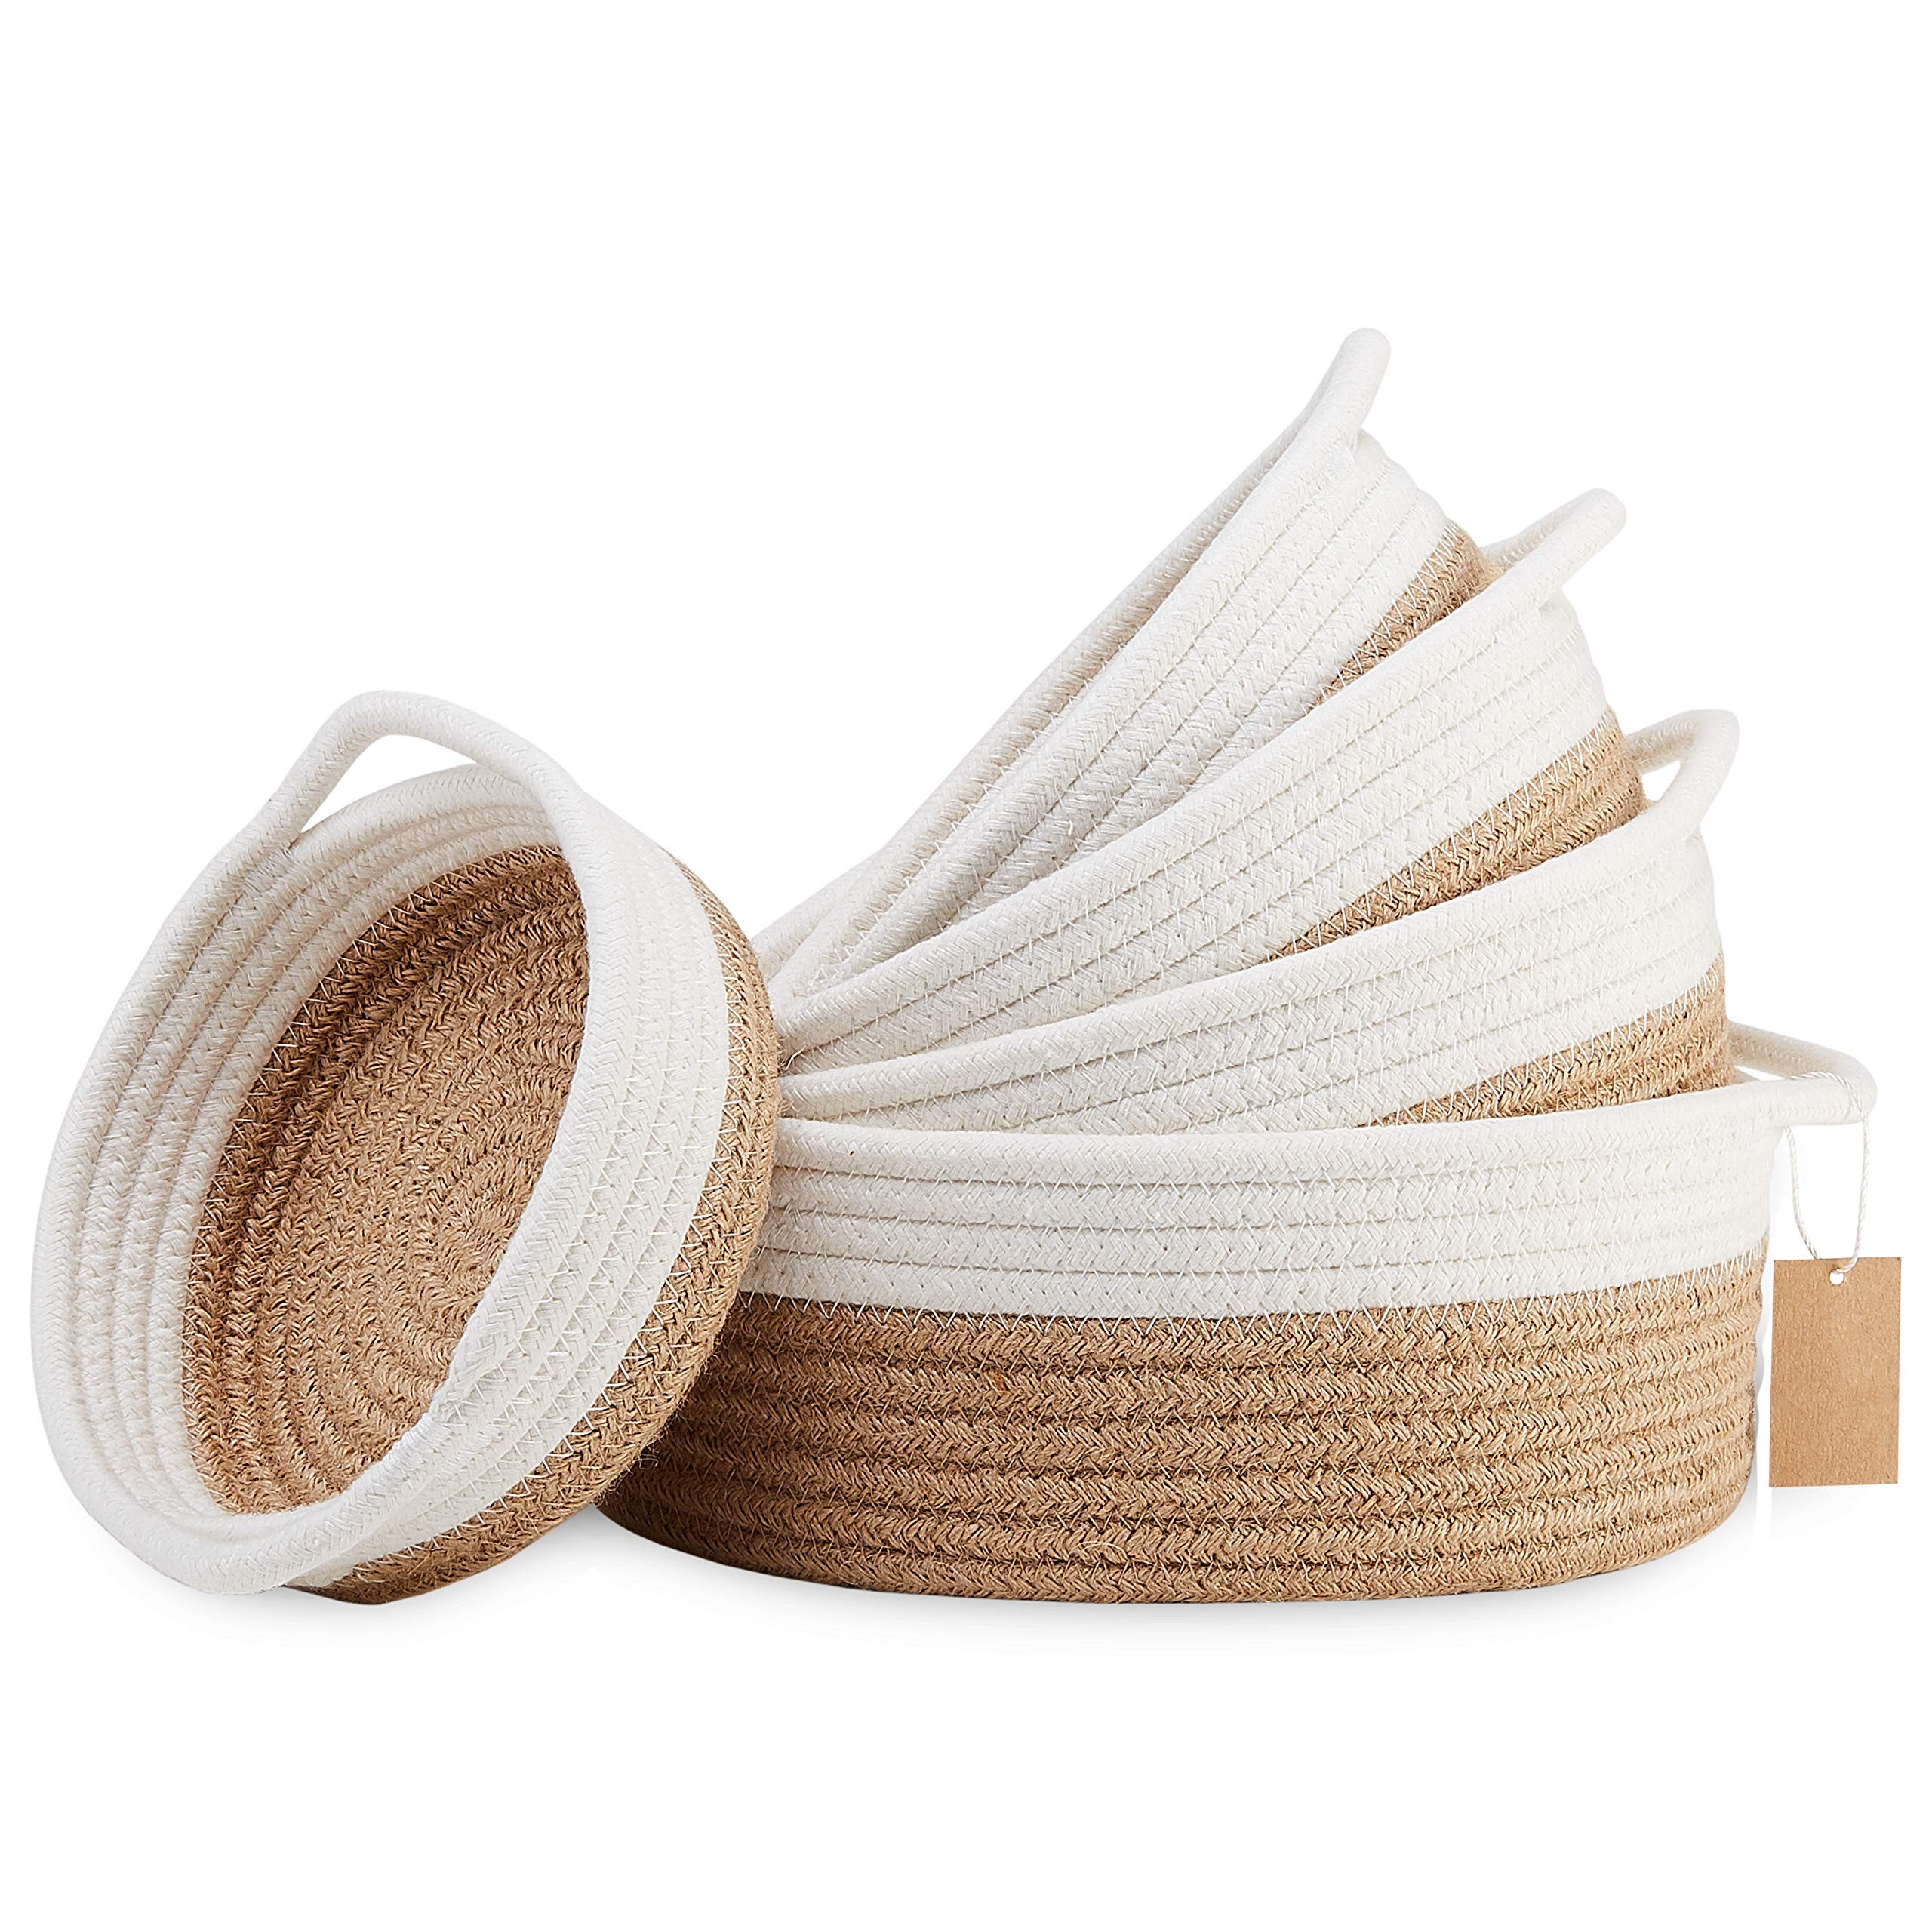 Round Small Woven Baskets Set 100% Natural Cotton Rope Home Decor